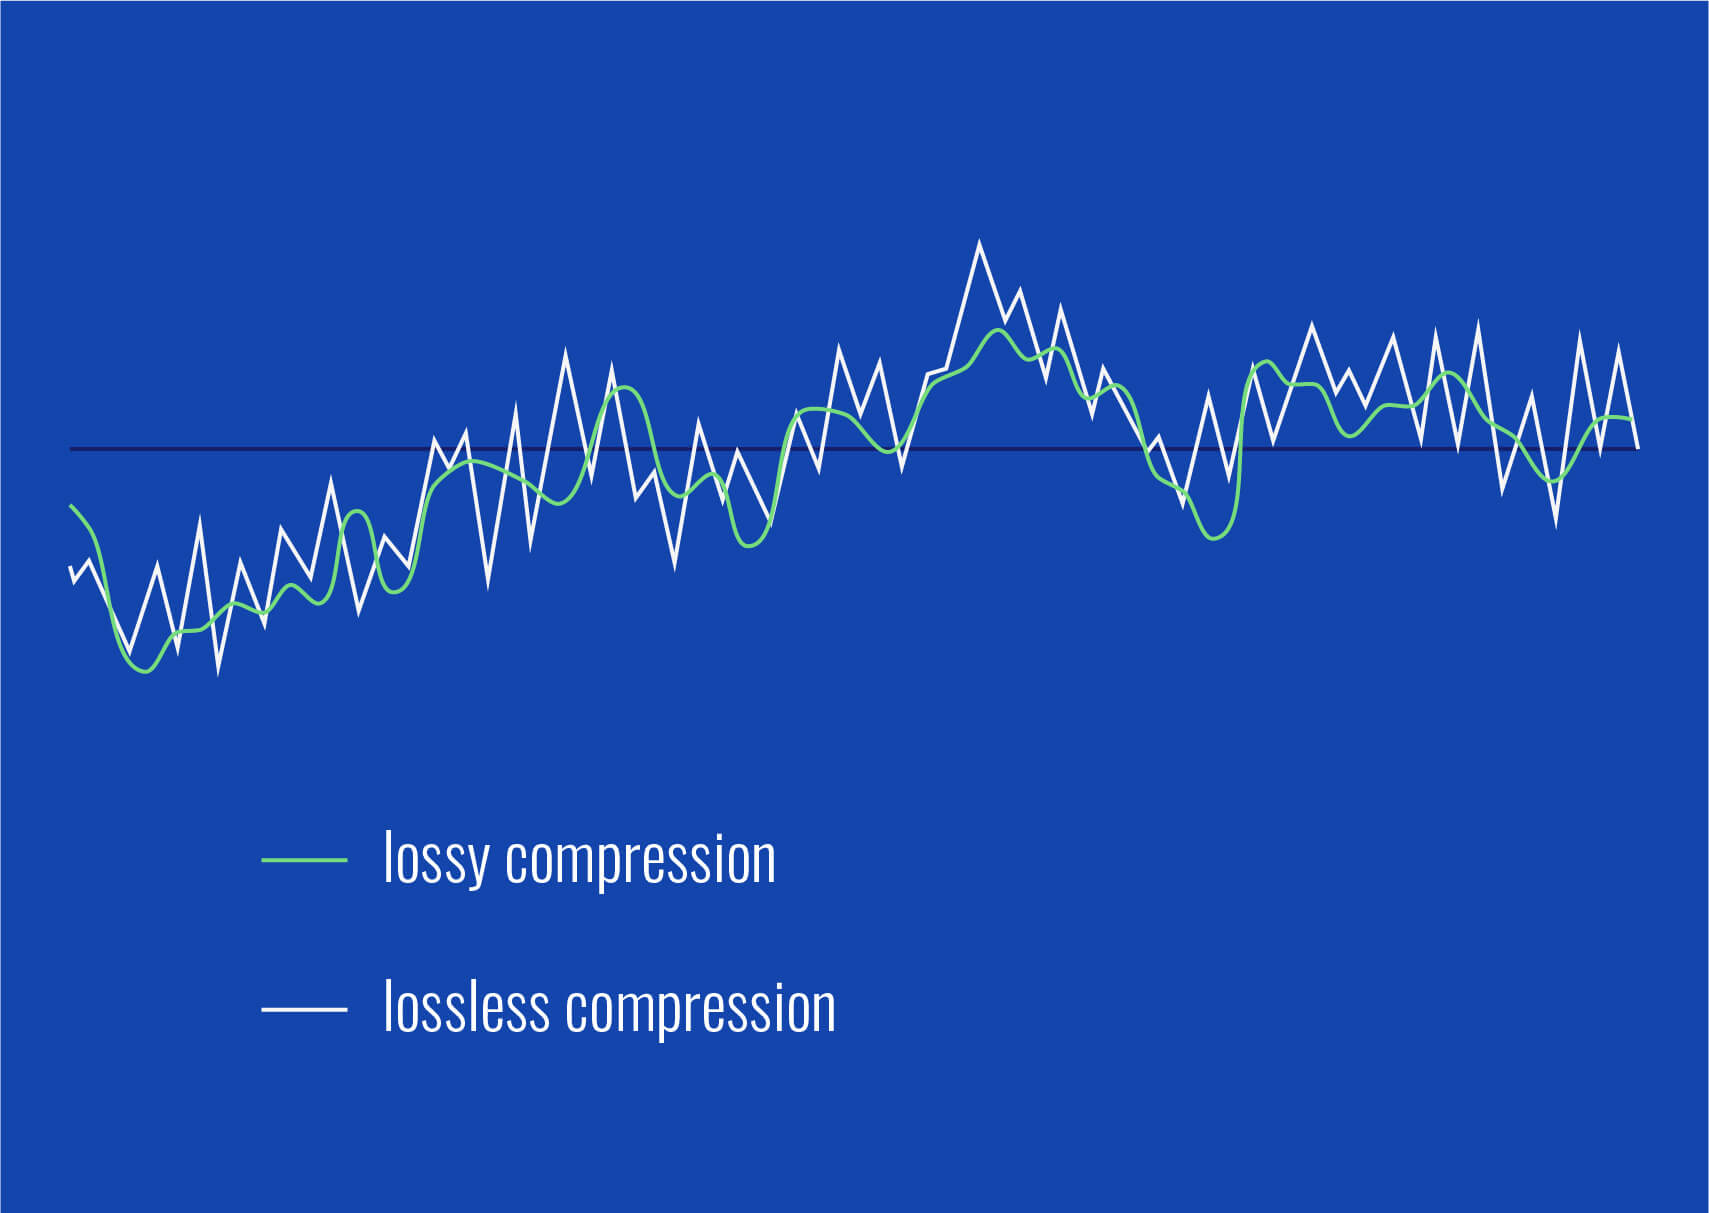 Lossy vs lossless compression

Here, the green line represents the signal strength of a lossy file while the white line represents that of a lossless file.

Both audio files are 16-bit files.

The amplitude of the lossy file isn't quite as powerful as the lossless file. 